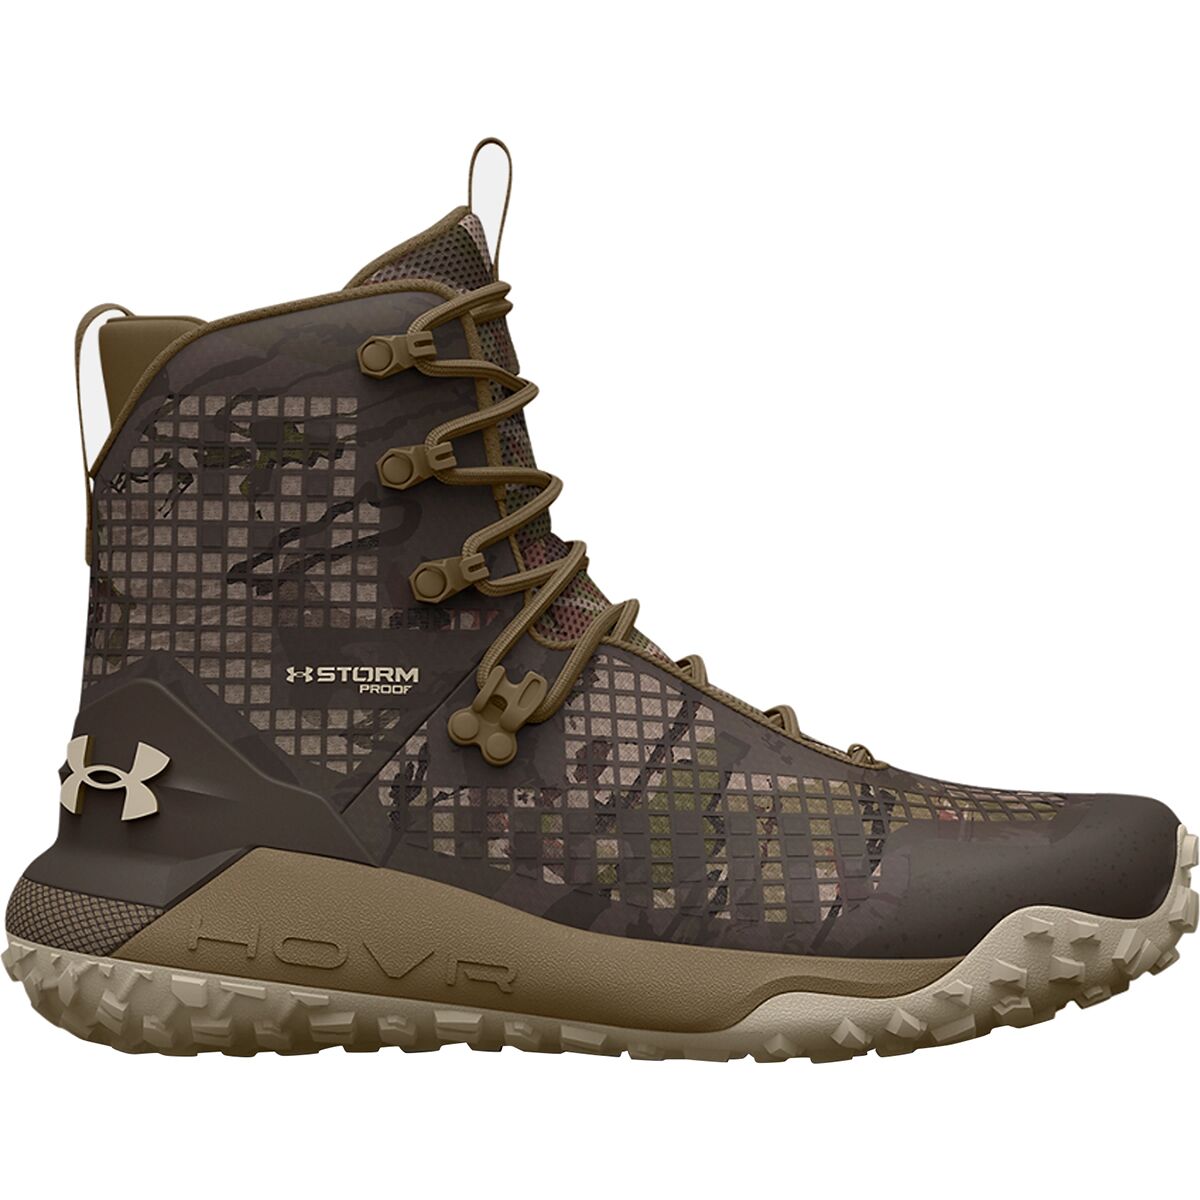 Under Armour HOVR Dawn WP 2.0 400G Hiking Boot - Men's